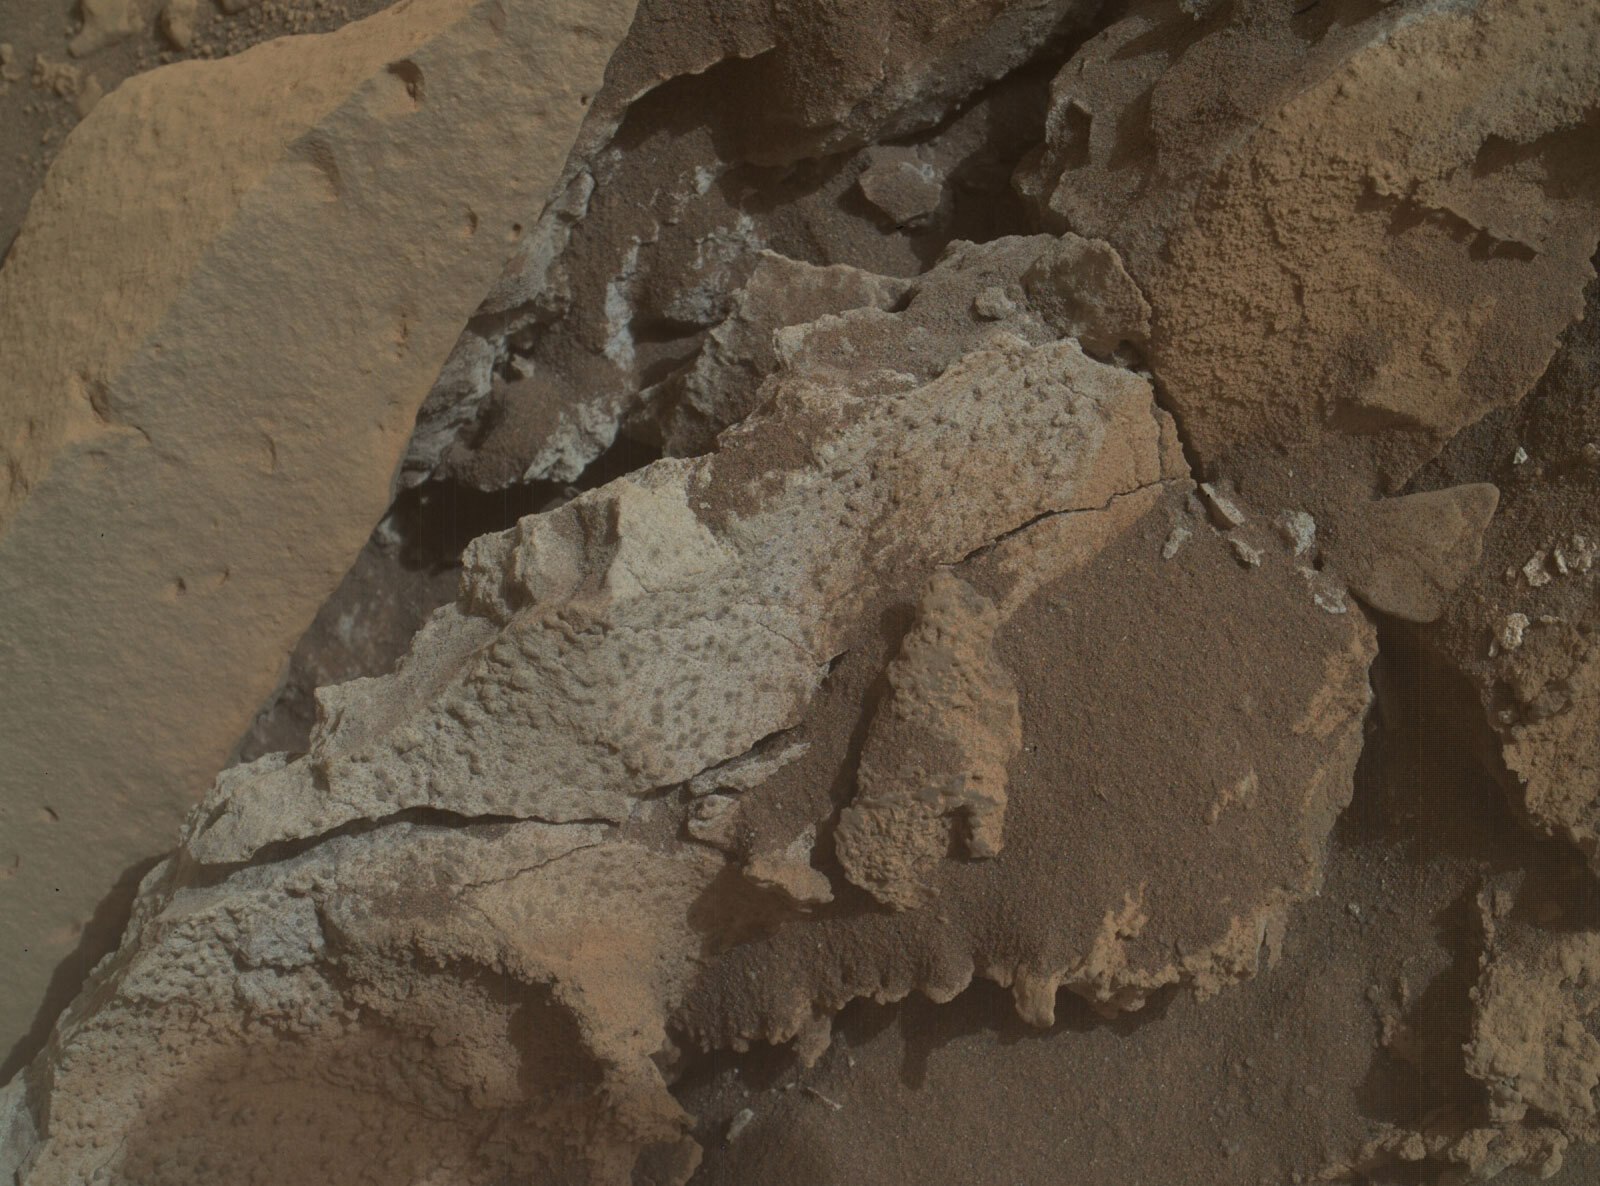 NASA's Mars rover Curiosity acquired this image using its Mars Hand Lens Imager (MAHLI), located on the turret at the end of the rover's robotic arm, on April 22, 2022, Sol 3451 of the Mars Science Laboratory Mission, at 01:58:18 UTC.